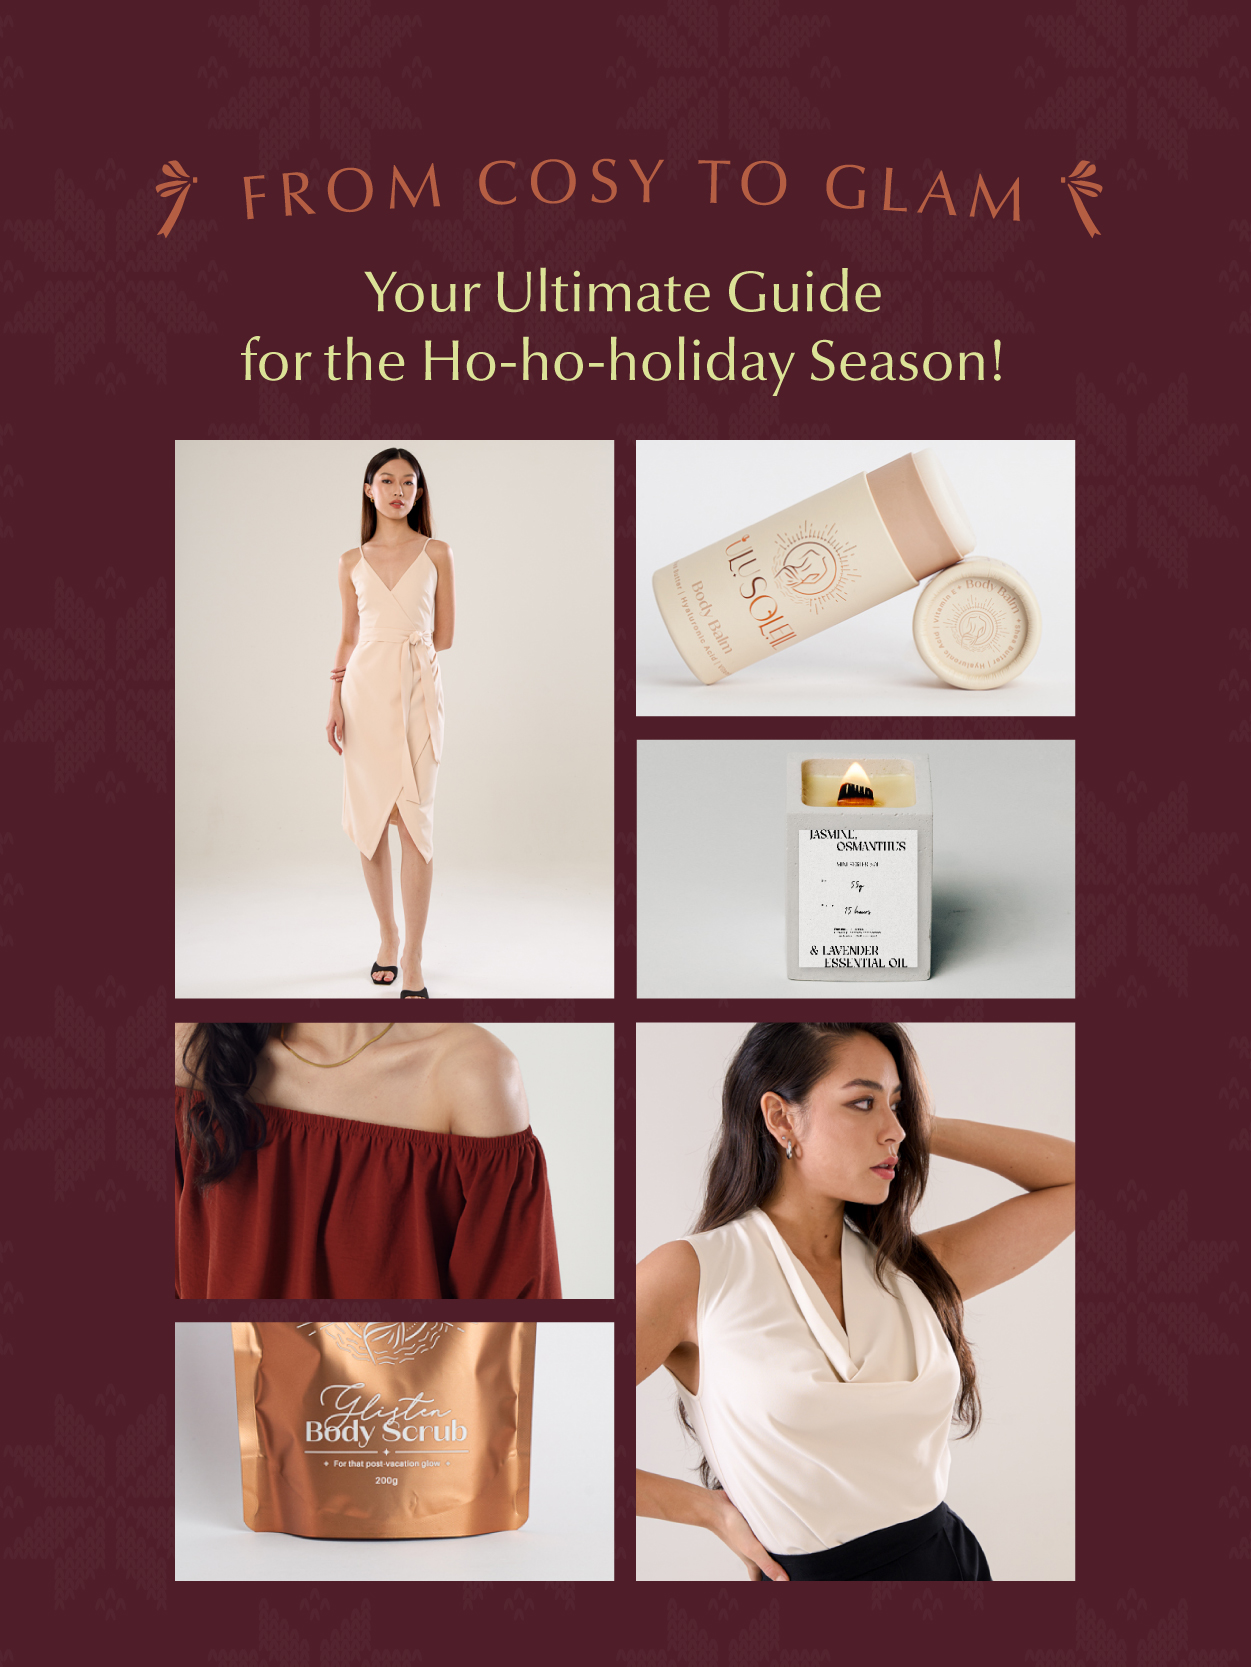 From Cozy to Glam: Your Ultimate Guide for the Ho-ho-holiday Season!